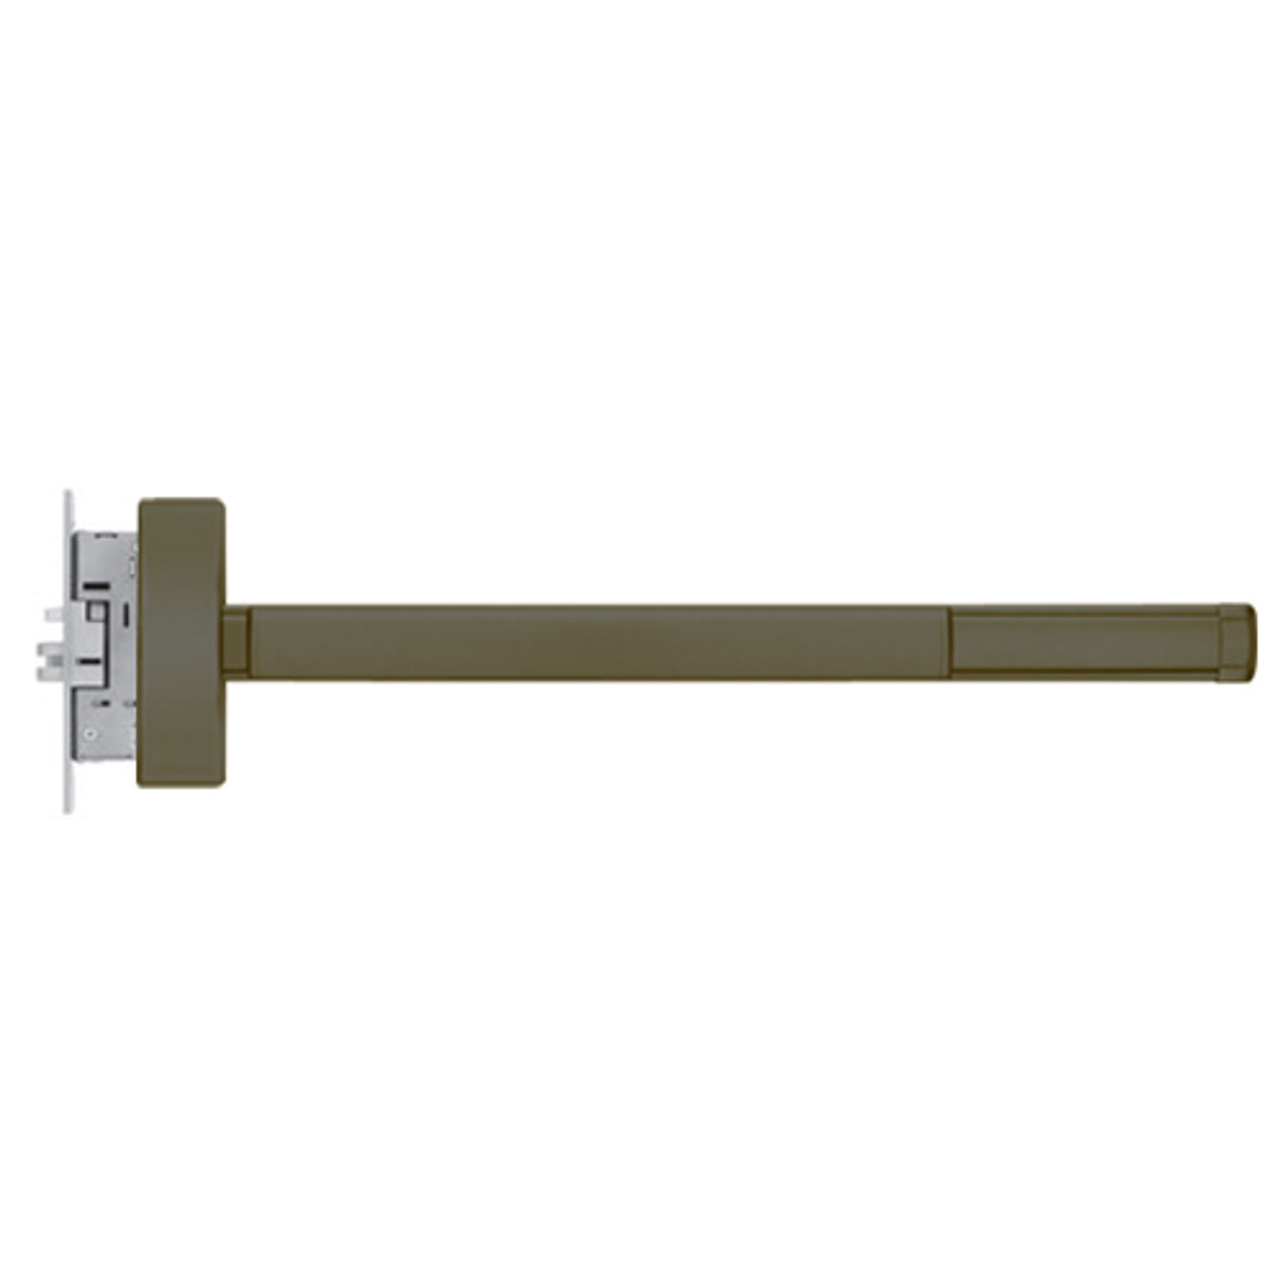 TS2305-LHR-613-48 PHI 2300 Series Apex Mortise Exit Device with Touchbar Monitoring Switch Prepped for Key Controls Thumb Piece in Oil Rubbed Bronze Finish